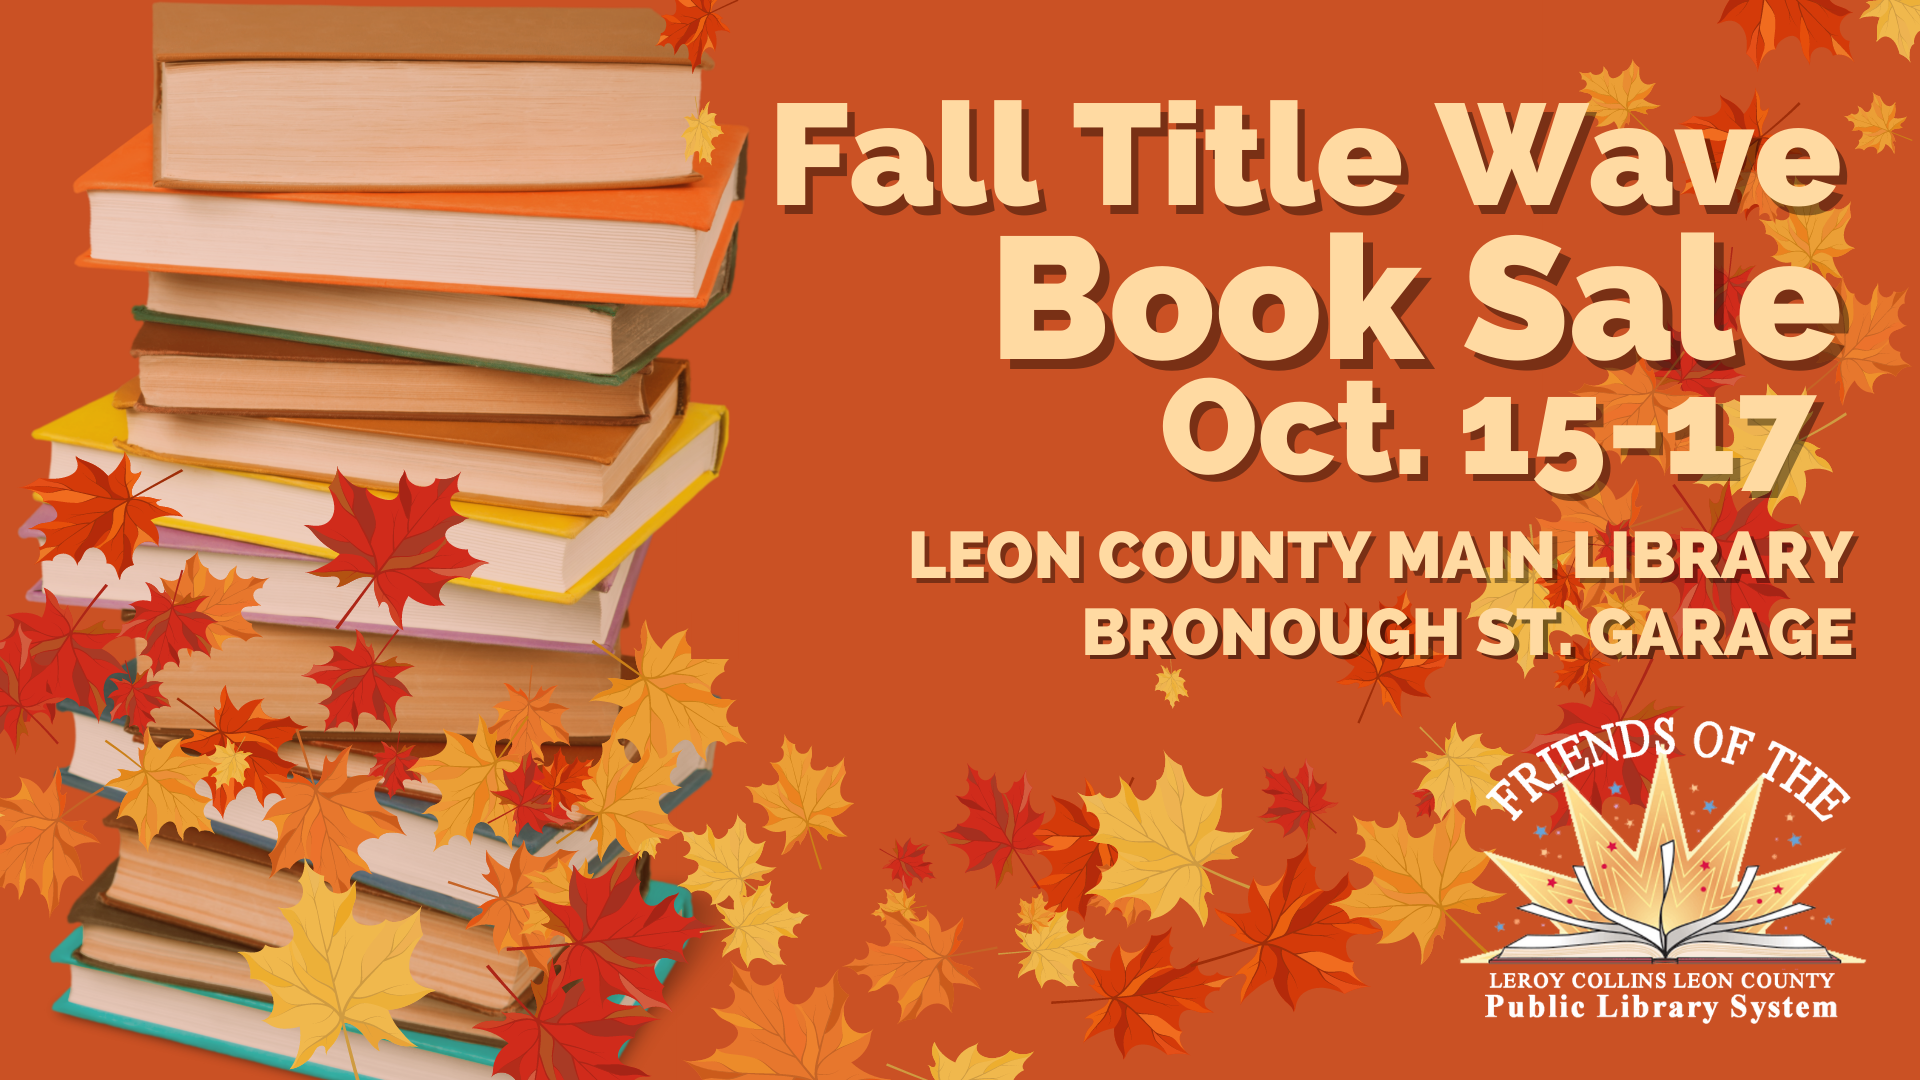 Friends of the Library Fall Title Wave Used Book Sale Graphic with Leaves